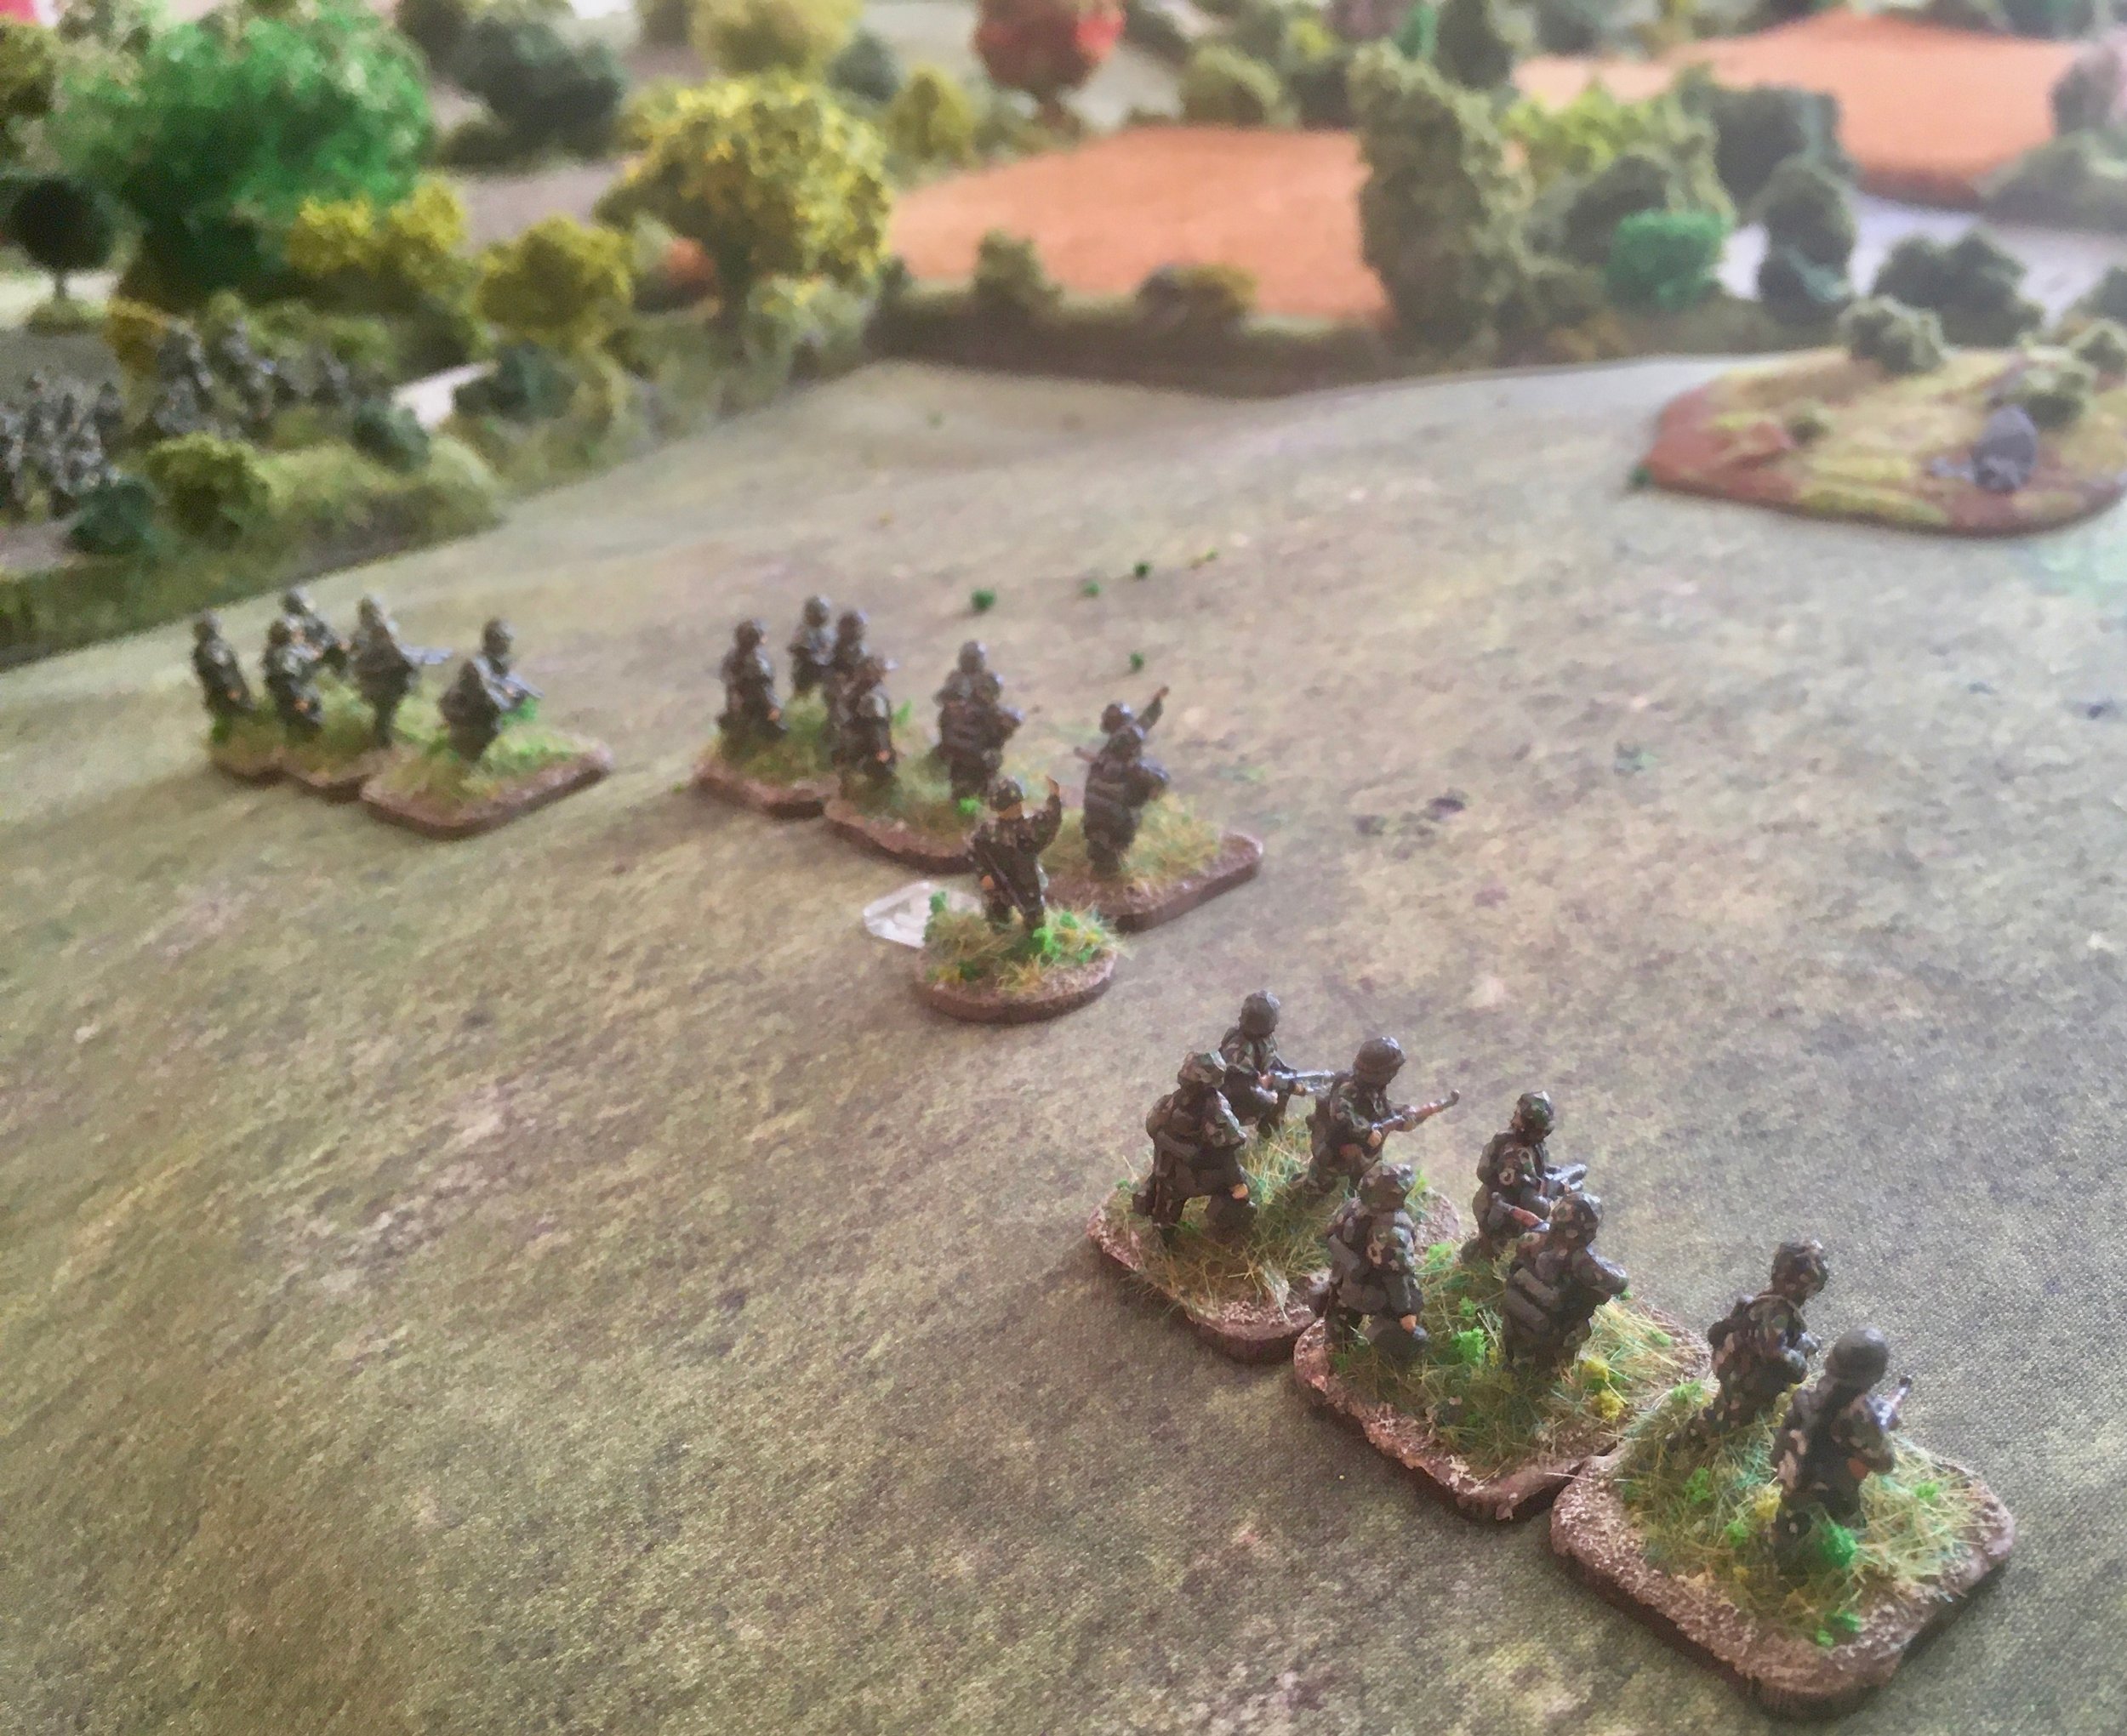 One platoon moving as quickly as possible over the exposed Normandy fields.